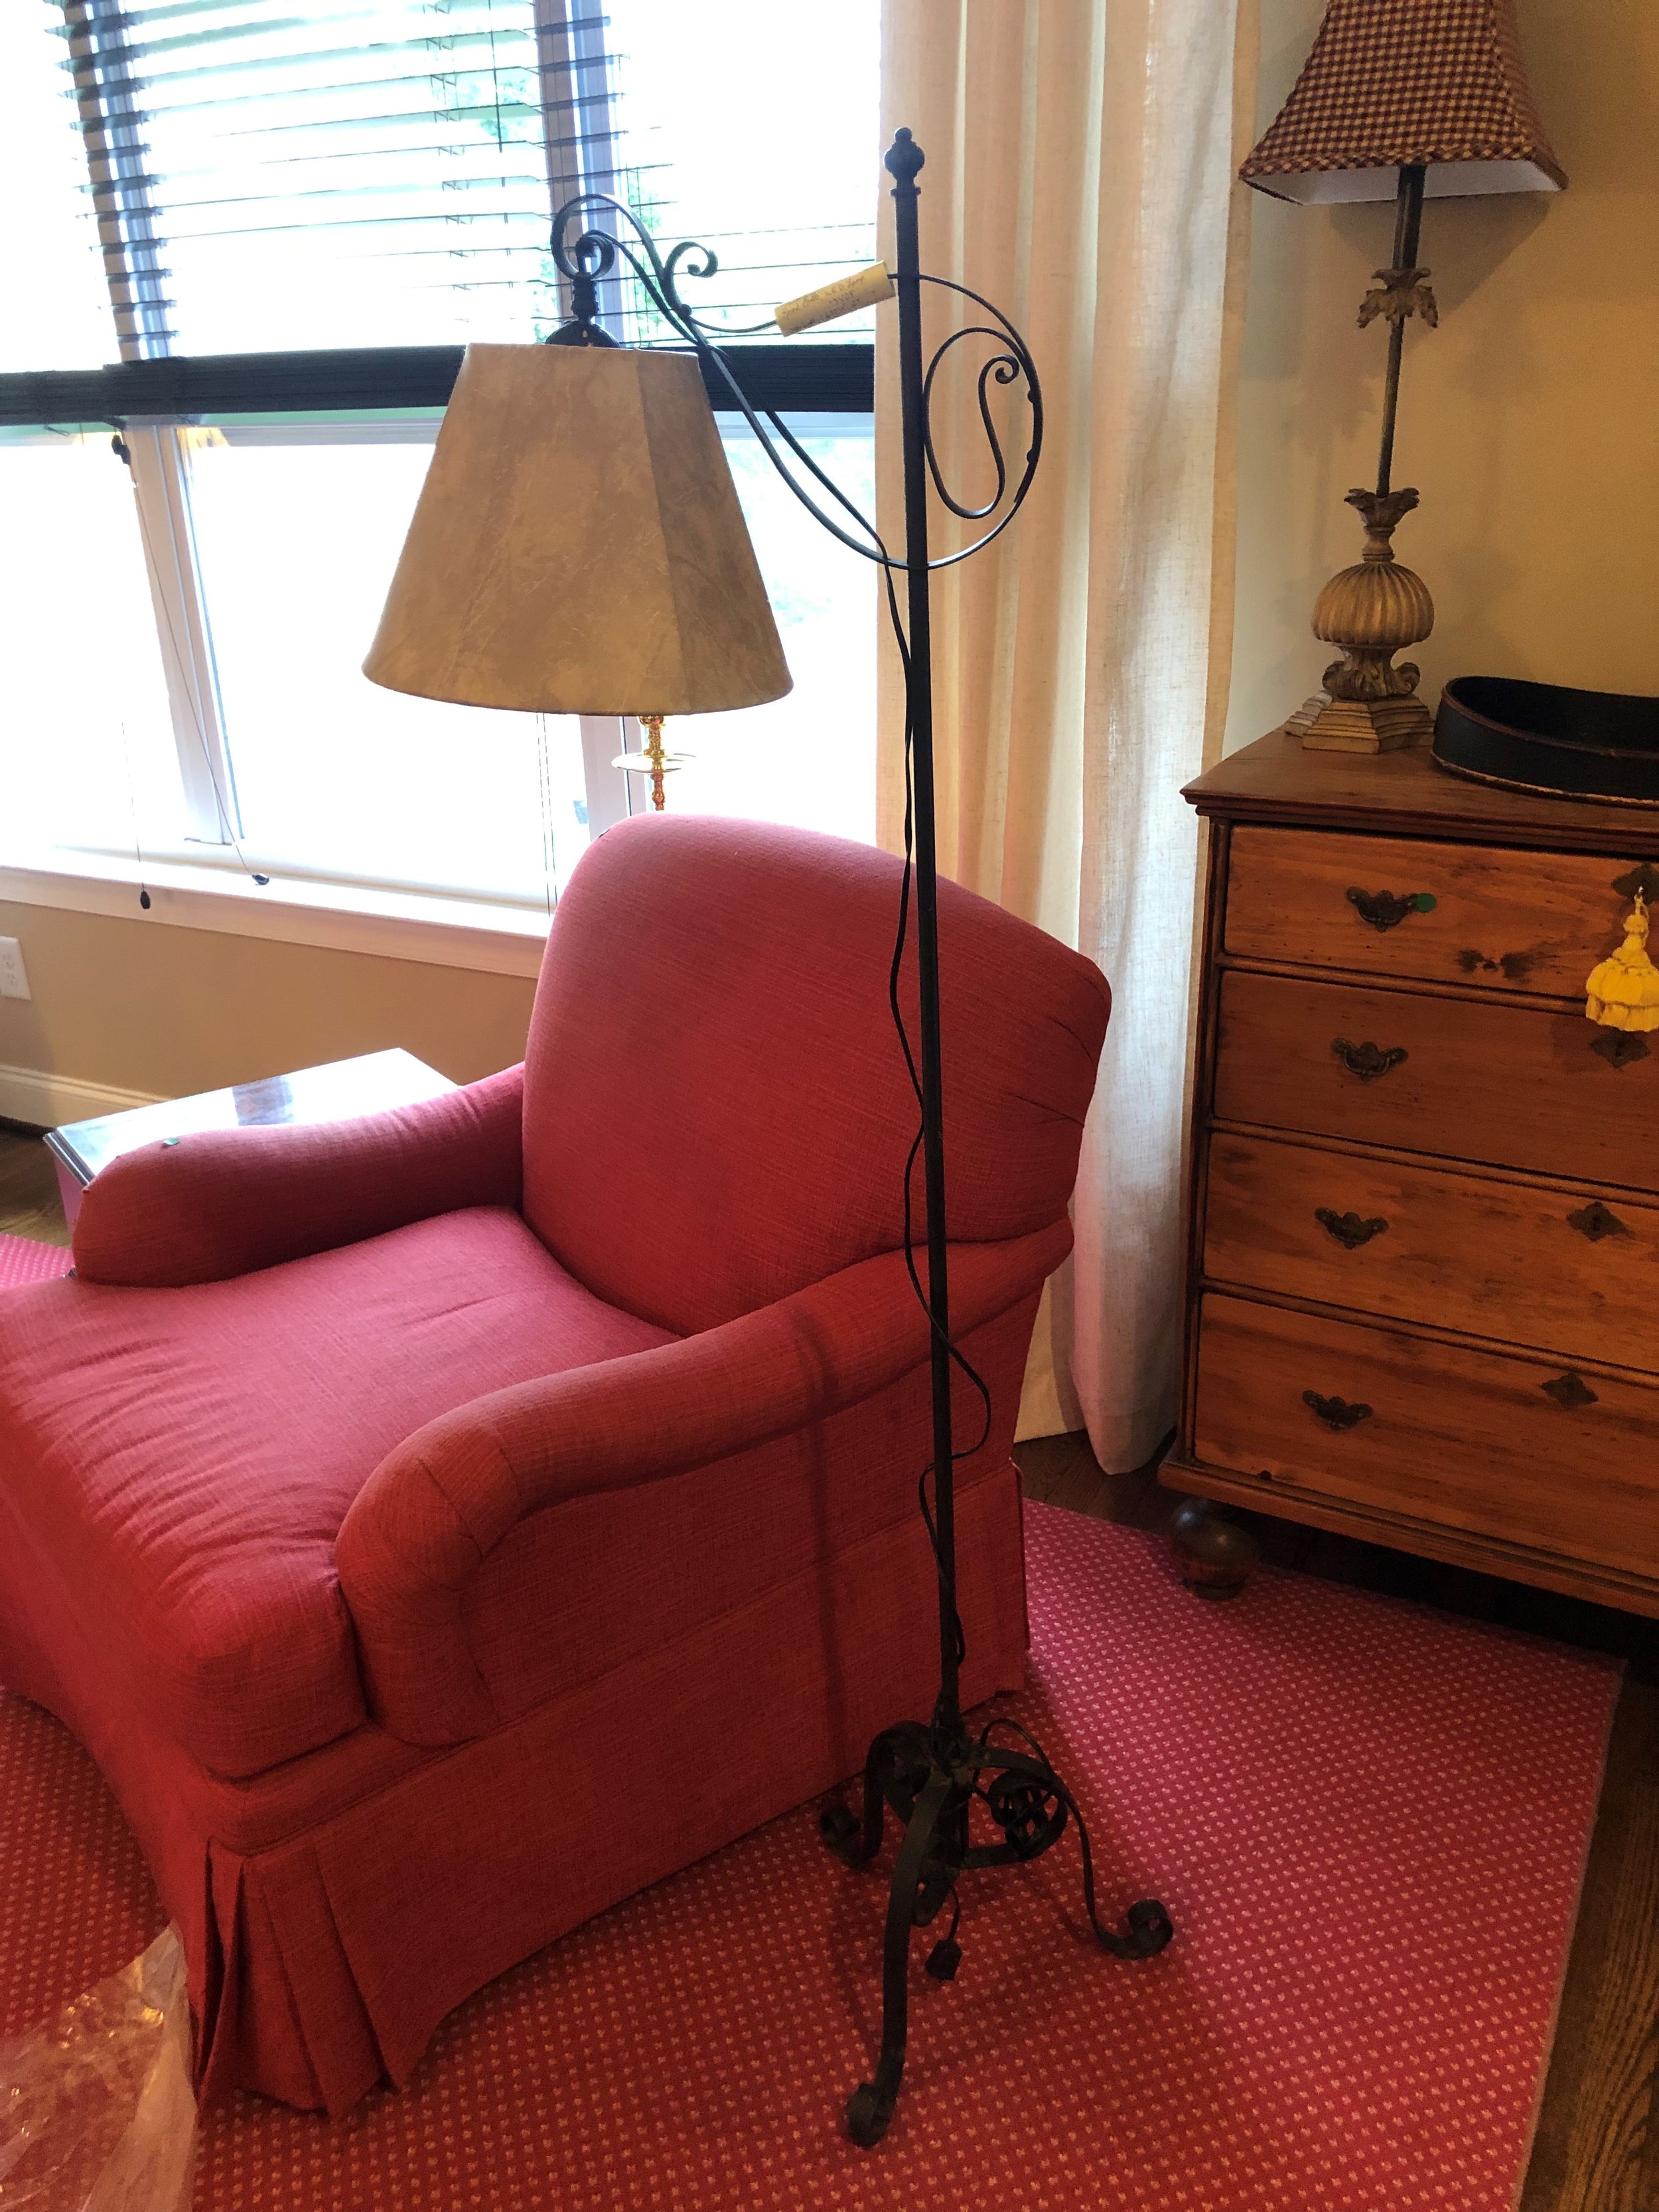 Lamp and Covered Chair.jpg